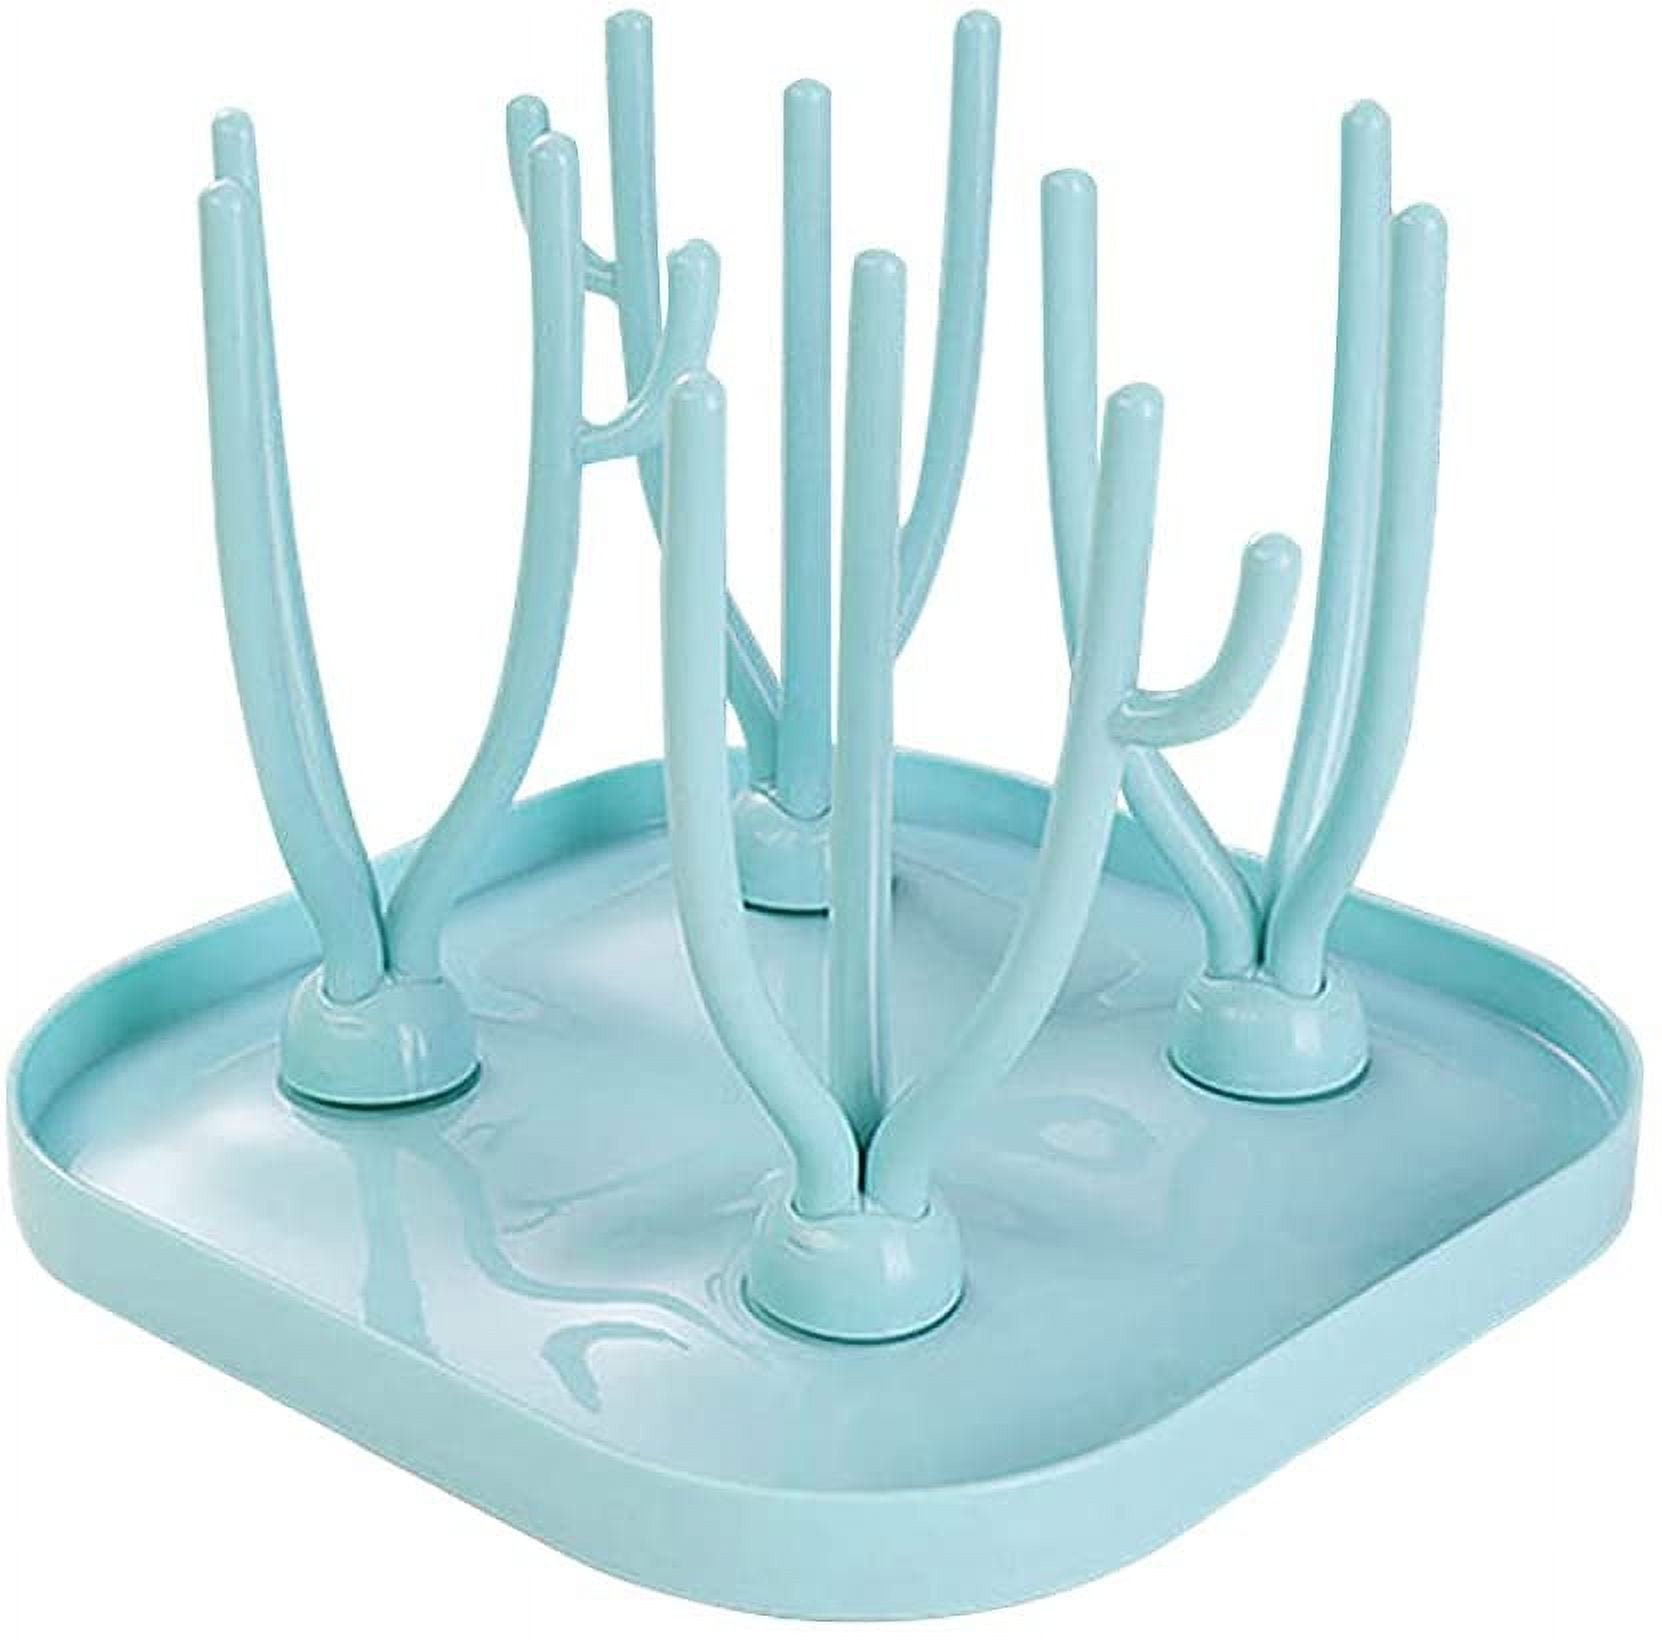 Termichy Travel Baby Bottle Drying Rack Compact Size with Large